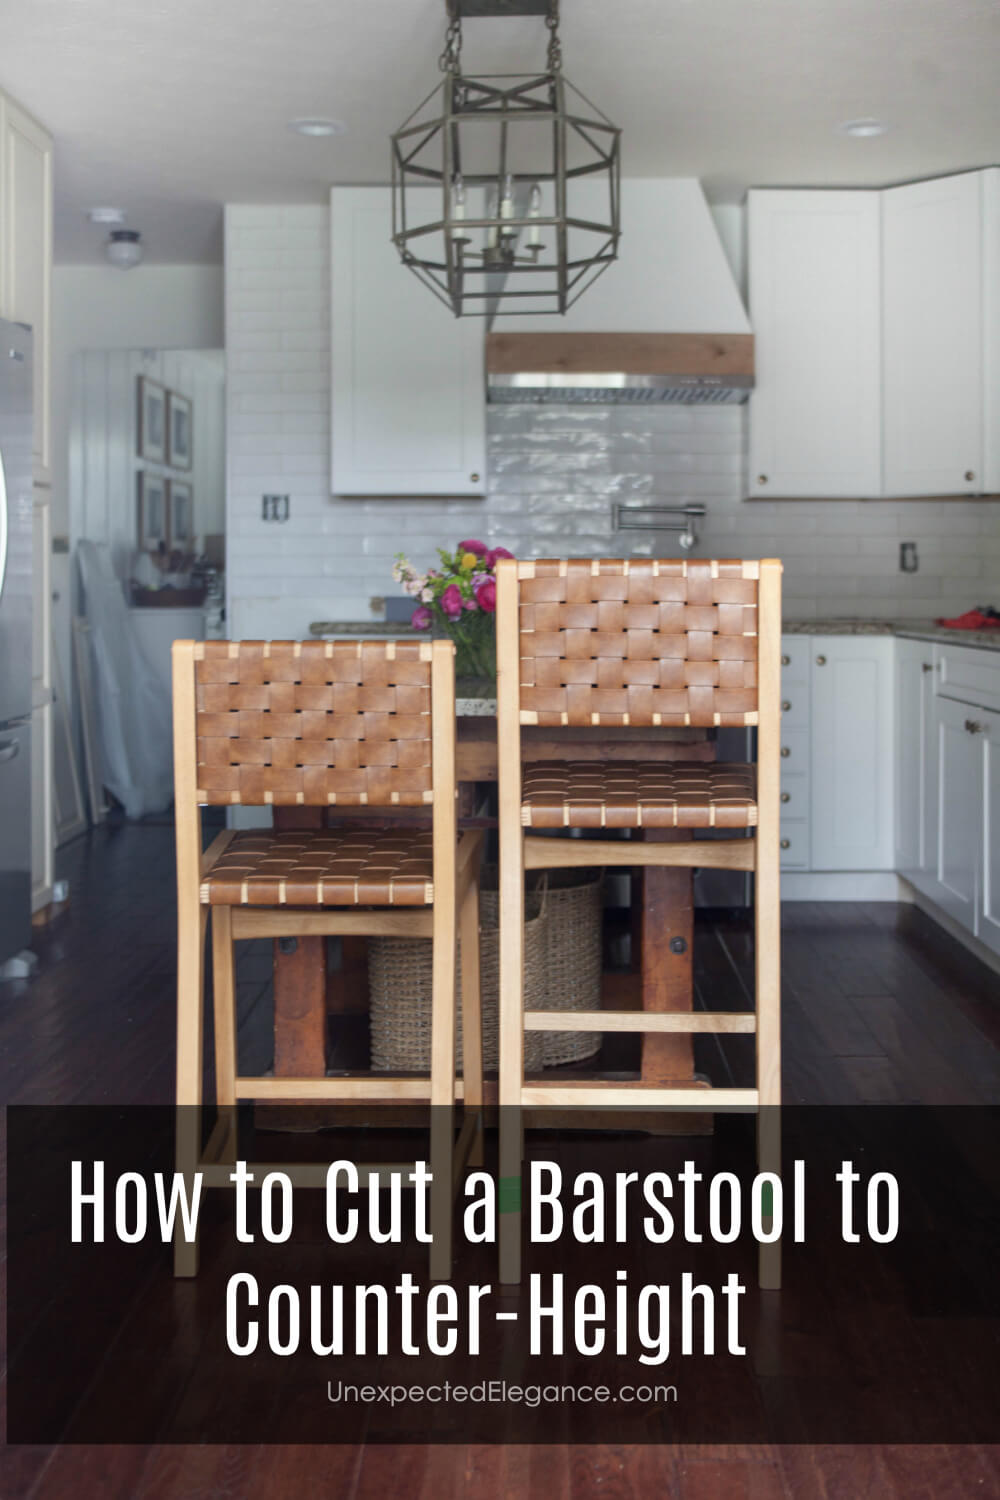 How To Cut A Barstool Counter Height, How To Cut The Legs On A Bar Stool